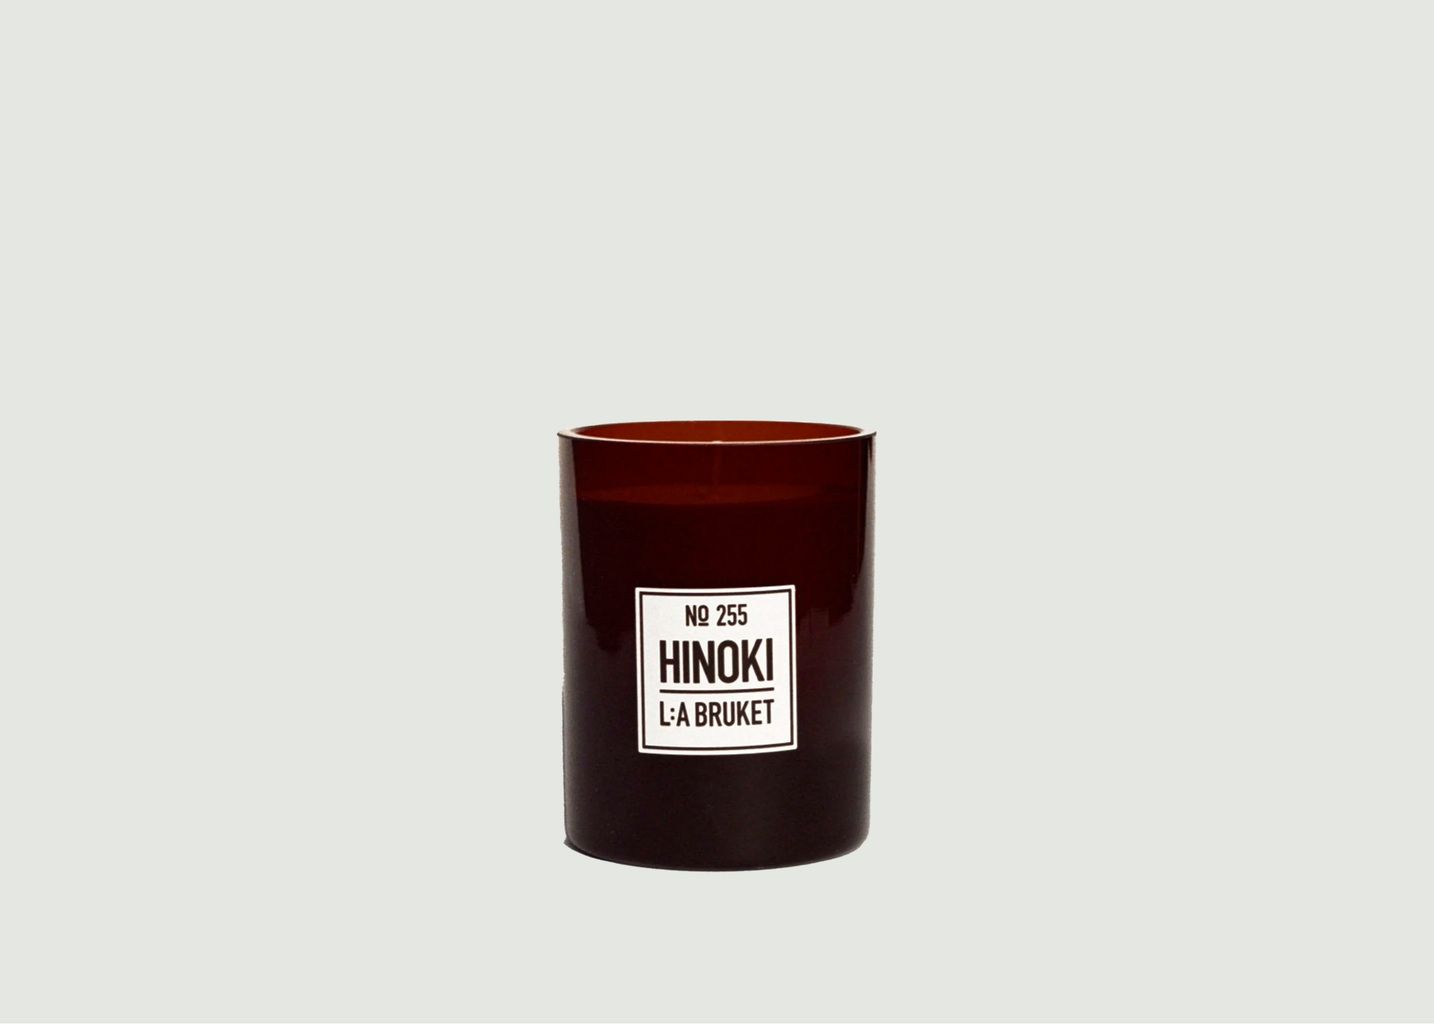 L:A Bruket Hinoki Scented Candle 260g